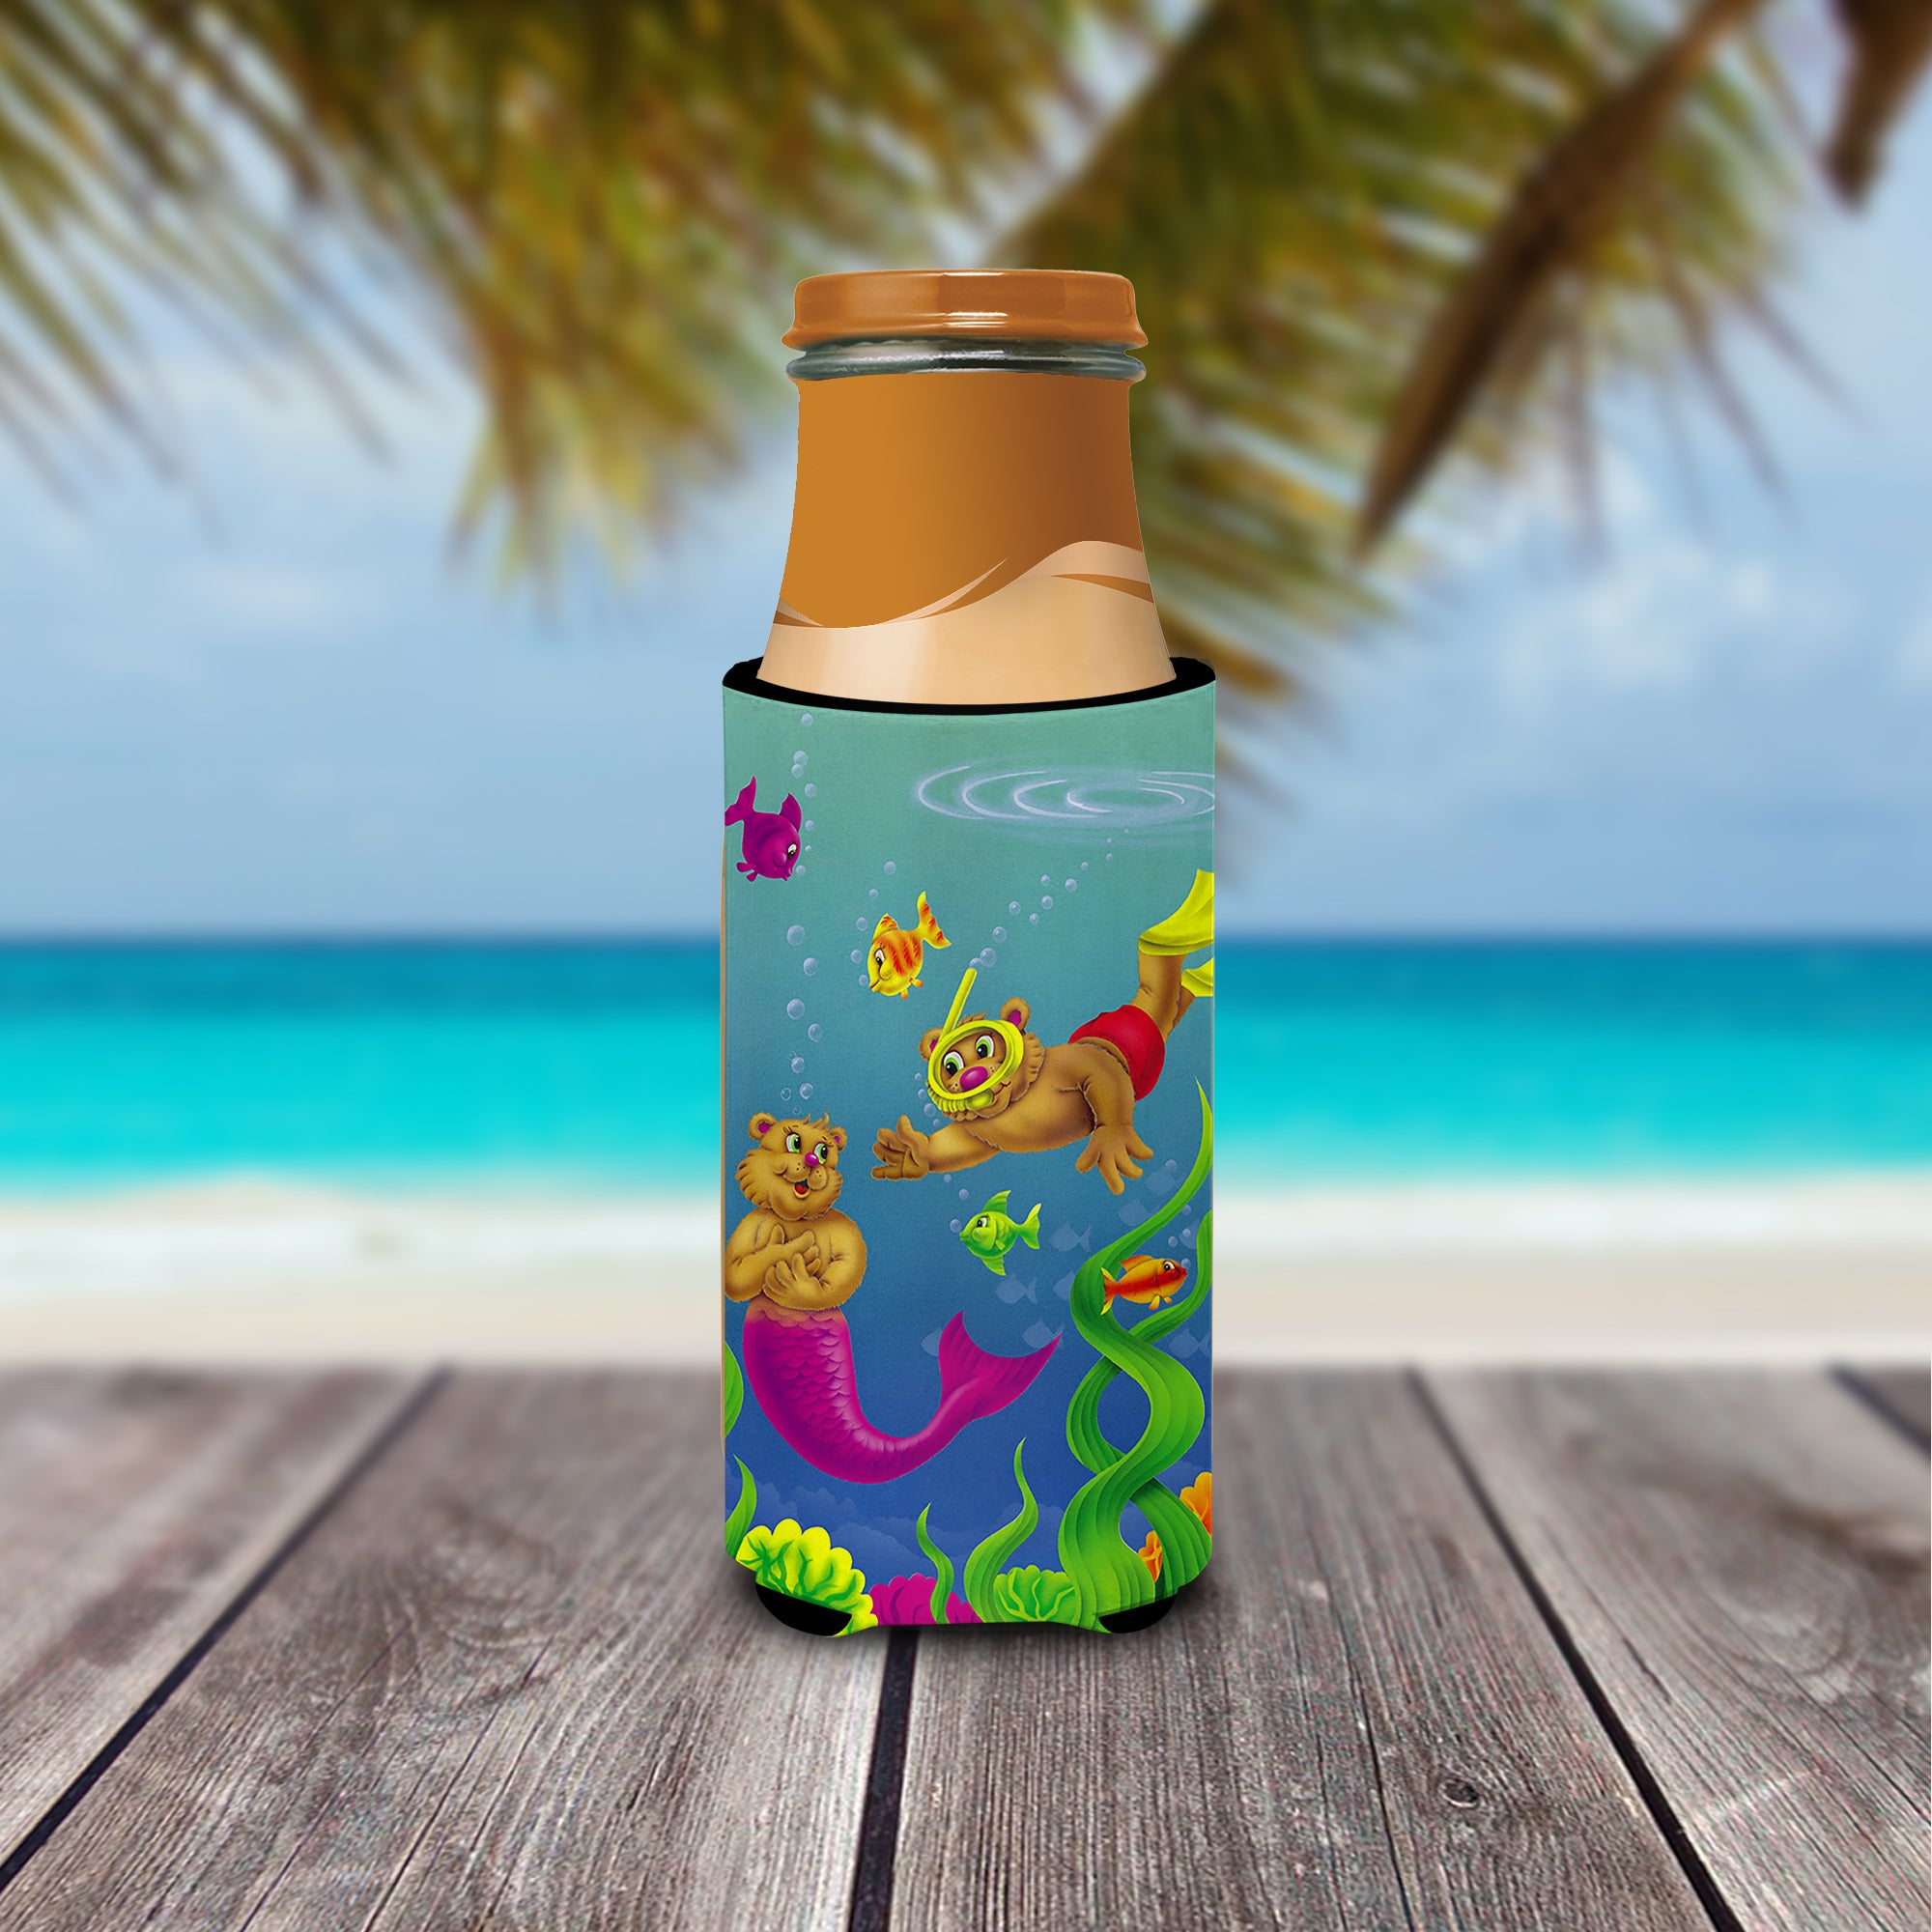 Teddy Bear Mermaid and Diver  Ultra Beverage Insulators for slim cans APH0414MUK